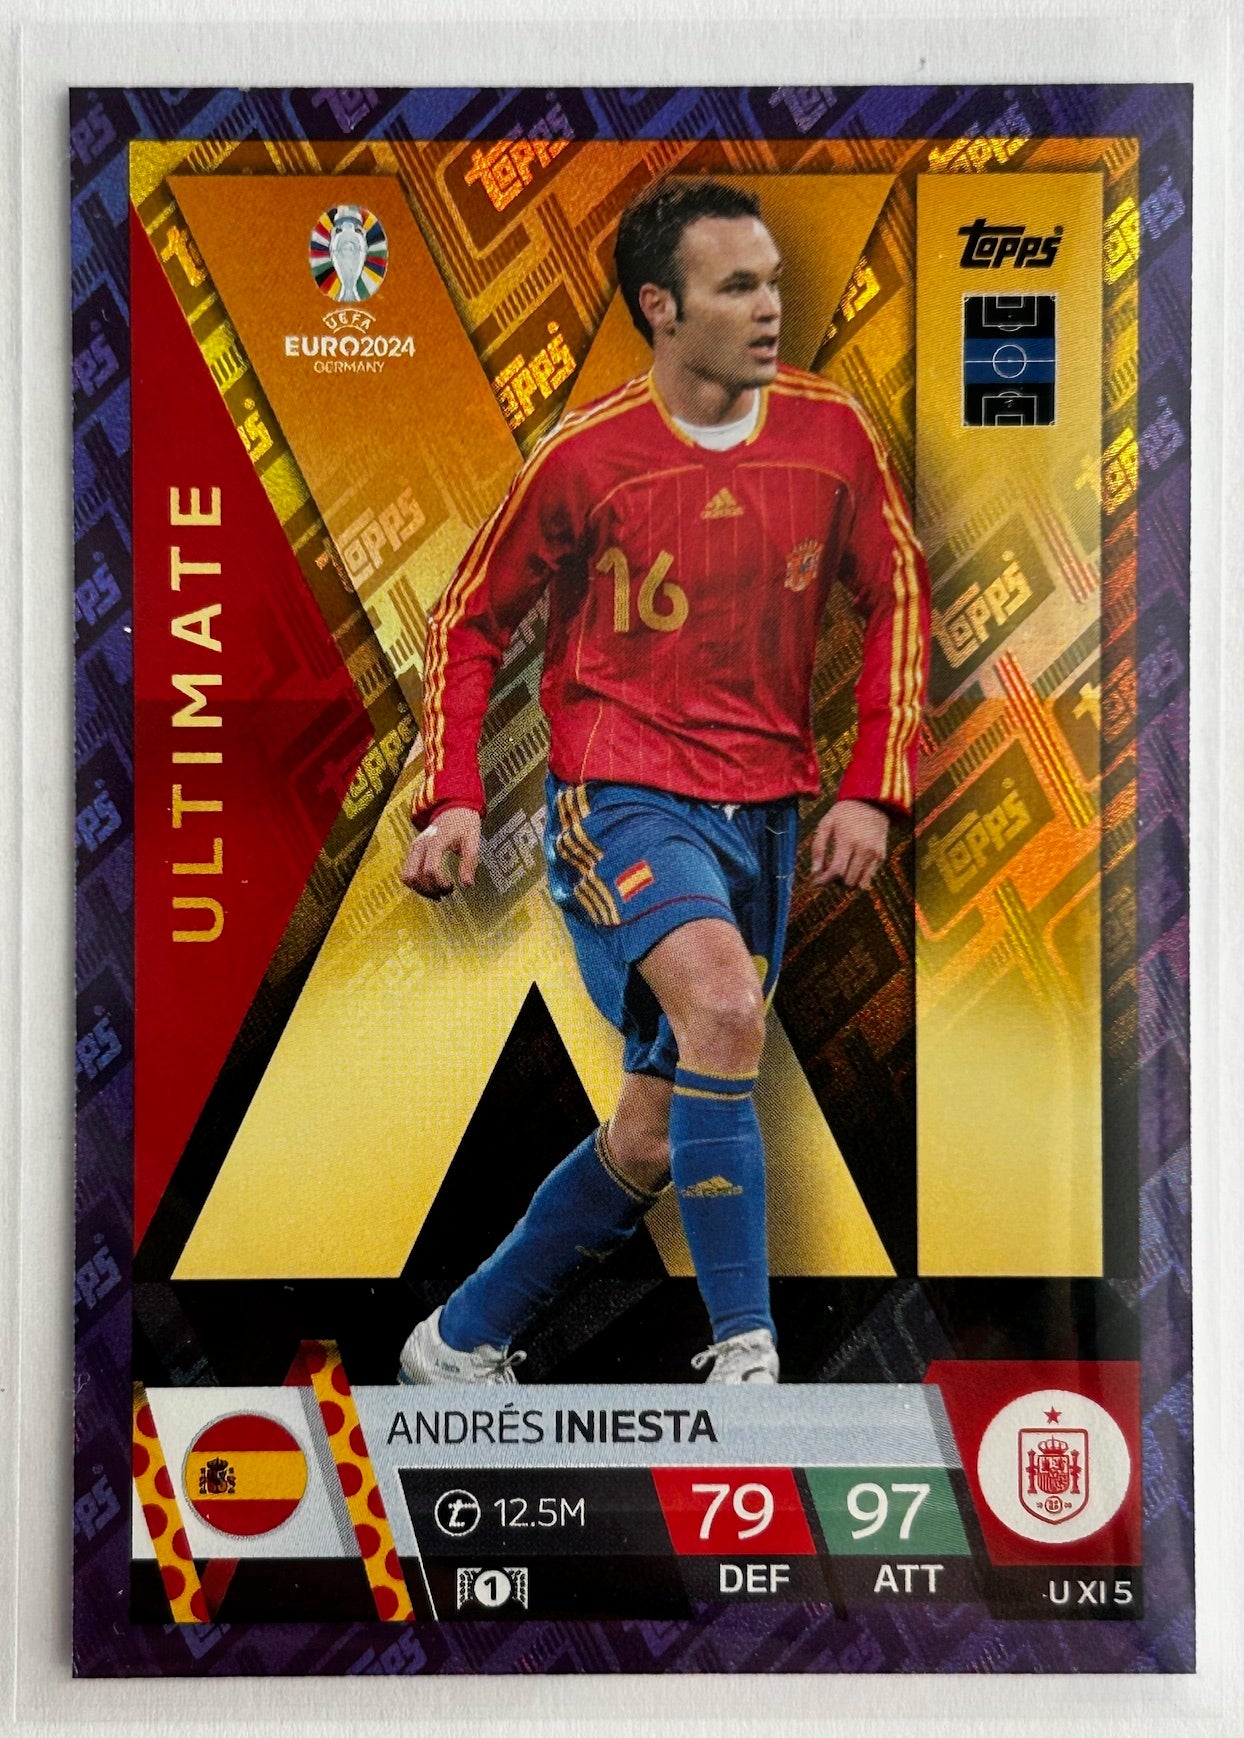 Topps Match Attax UEFA EURO 2024 - INIESTA (SPAIN) Purple Parallel Ultimate XI UXI5